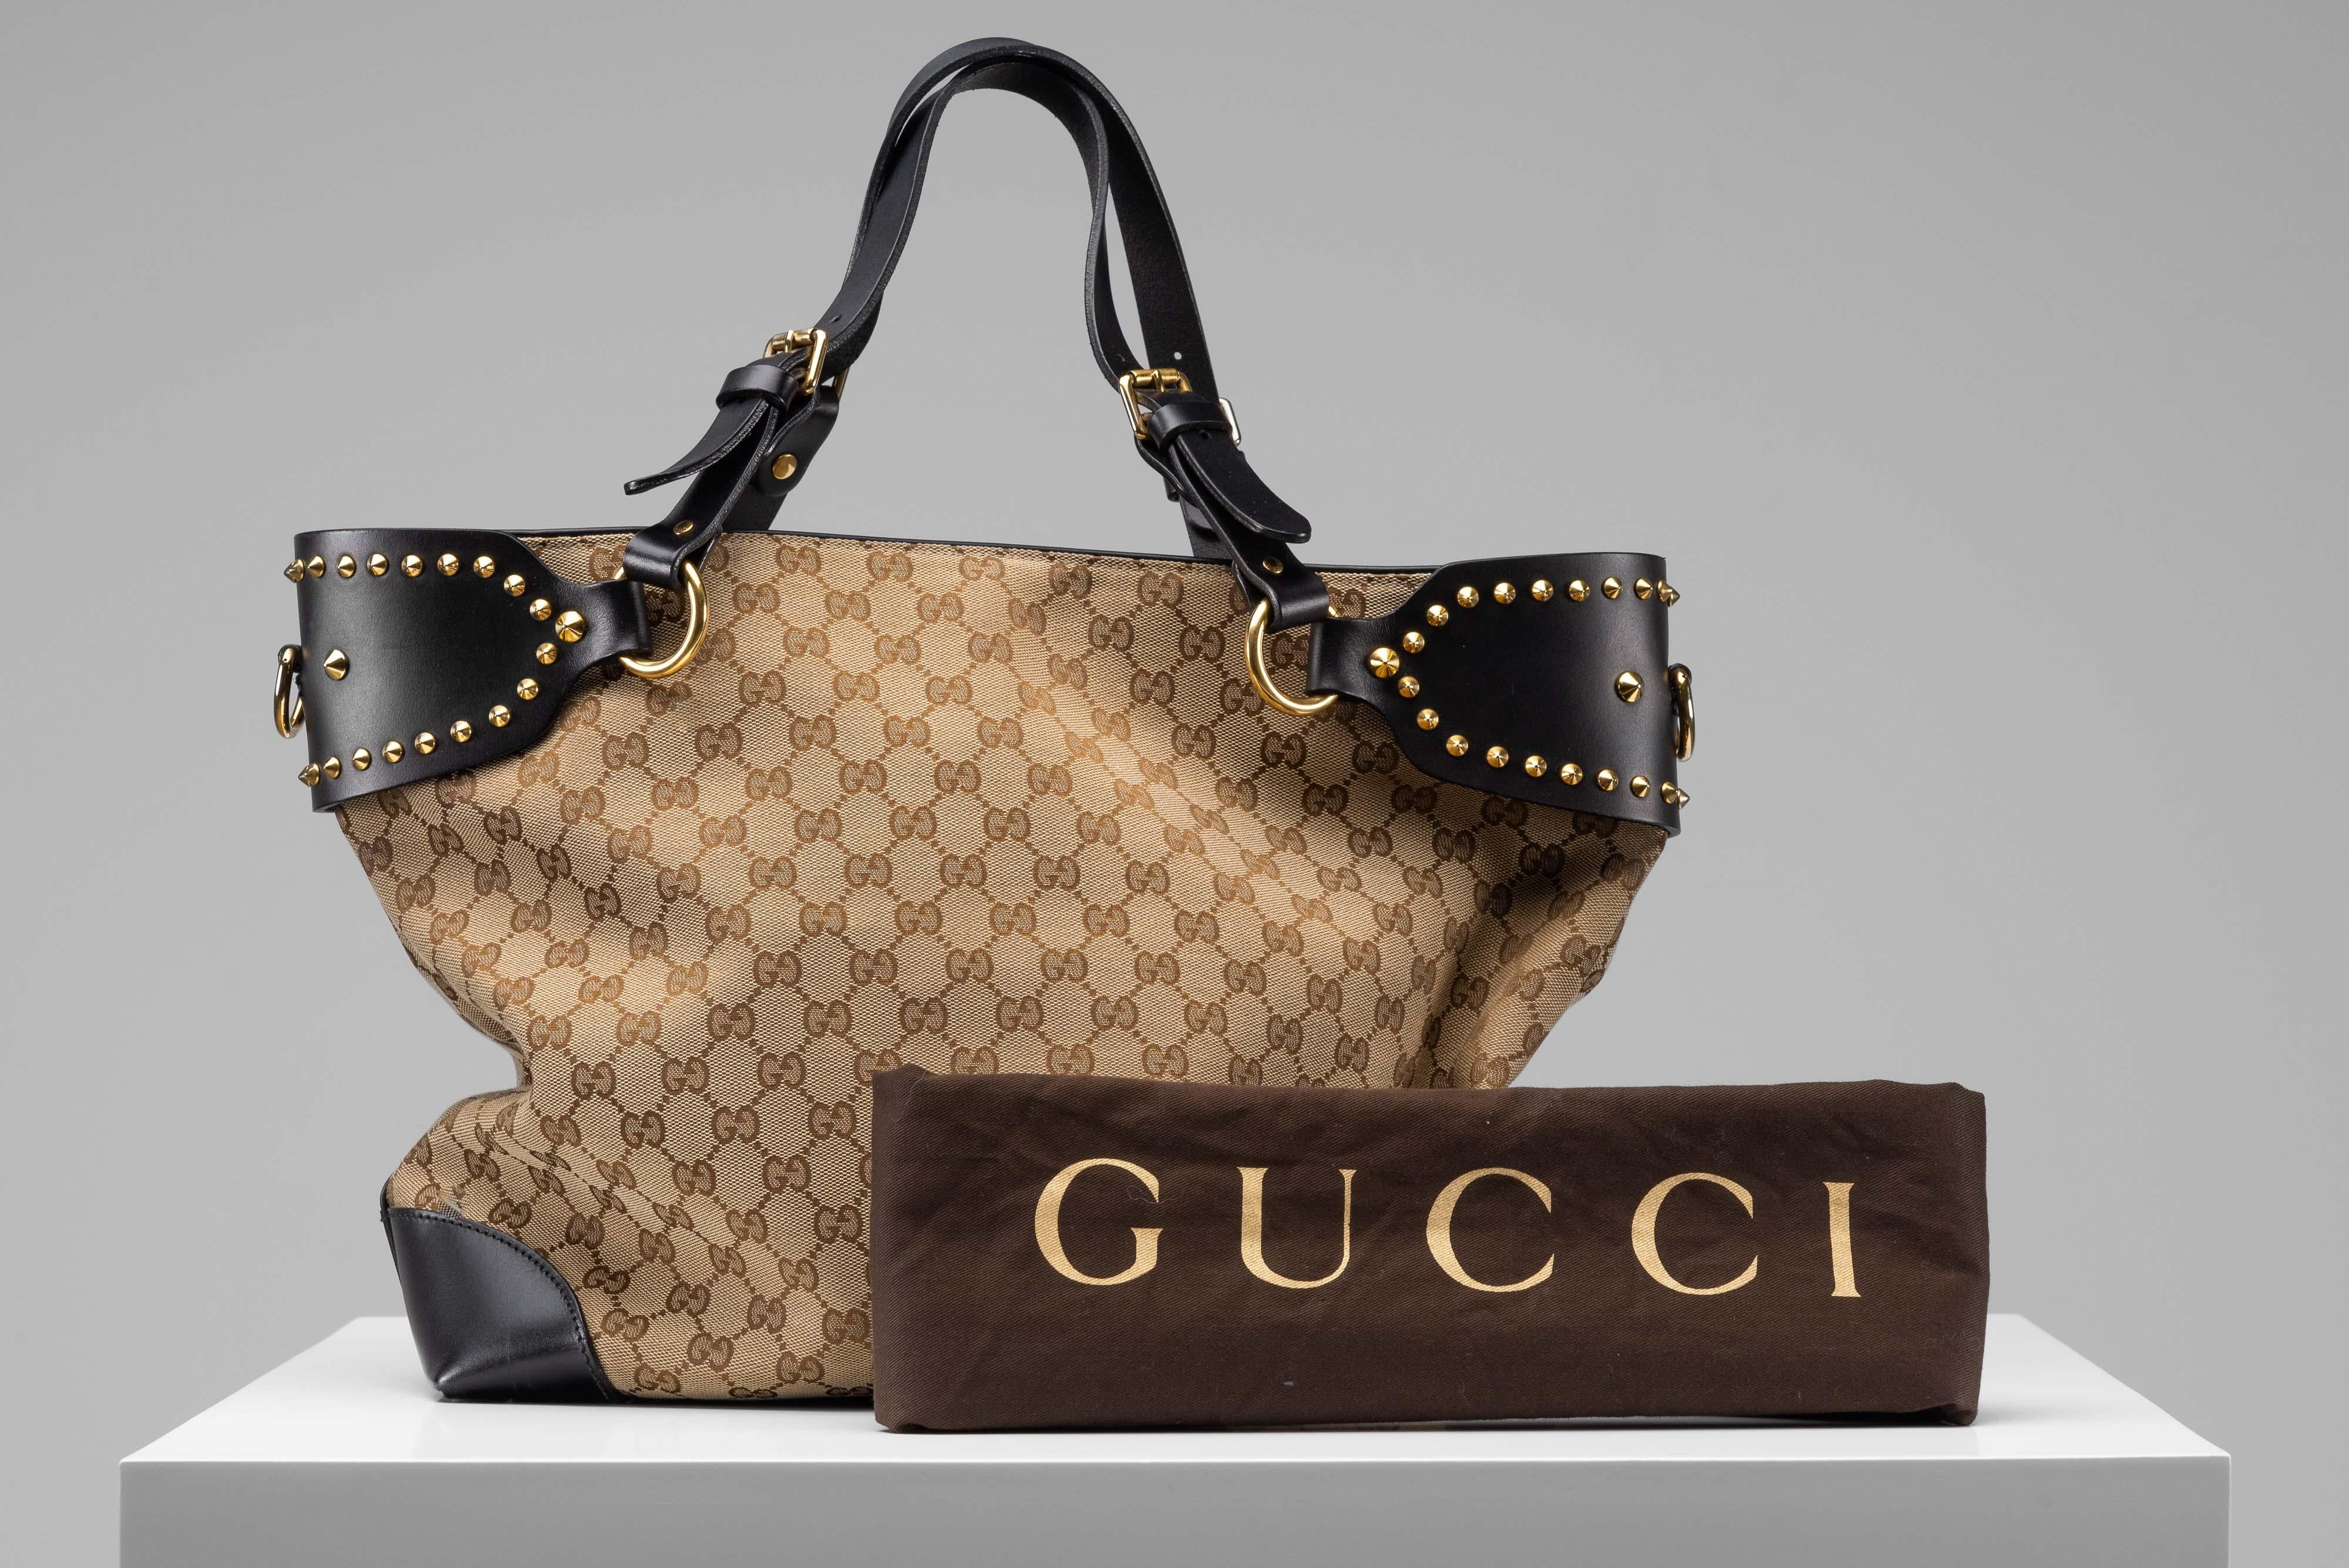 From the collection of SAVINETI we offer this Gucci GG Studded Patti Tote:
-    Brand: Gucci 
-    Model: GG Studded Patti Tote
-    Condition: Very Good Condition
-    Materials: canvas, leather, gold-tone hardware
-    Extras: